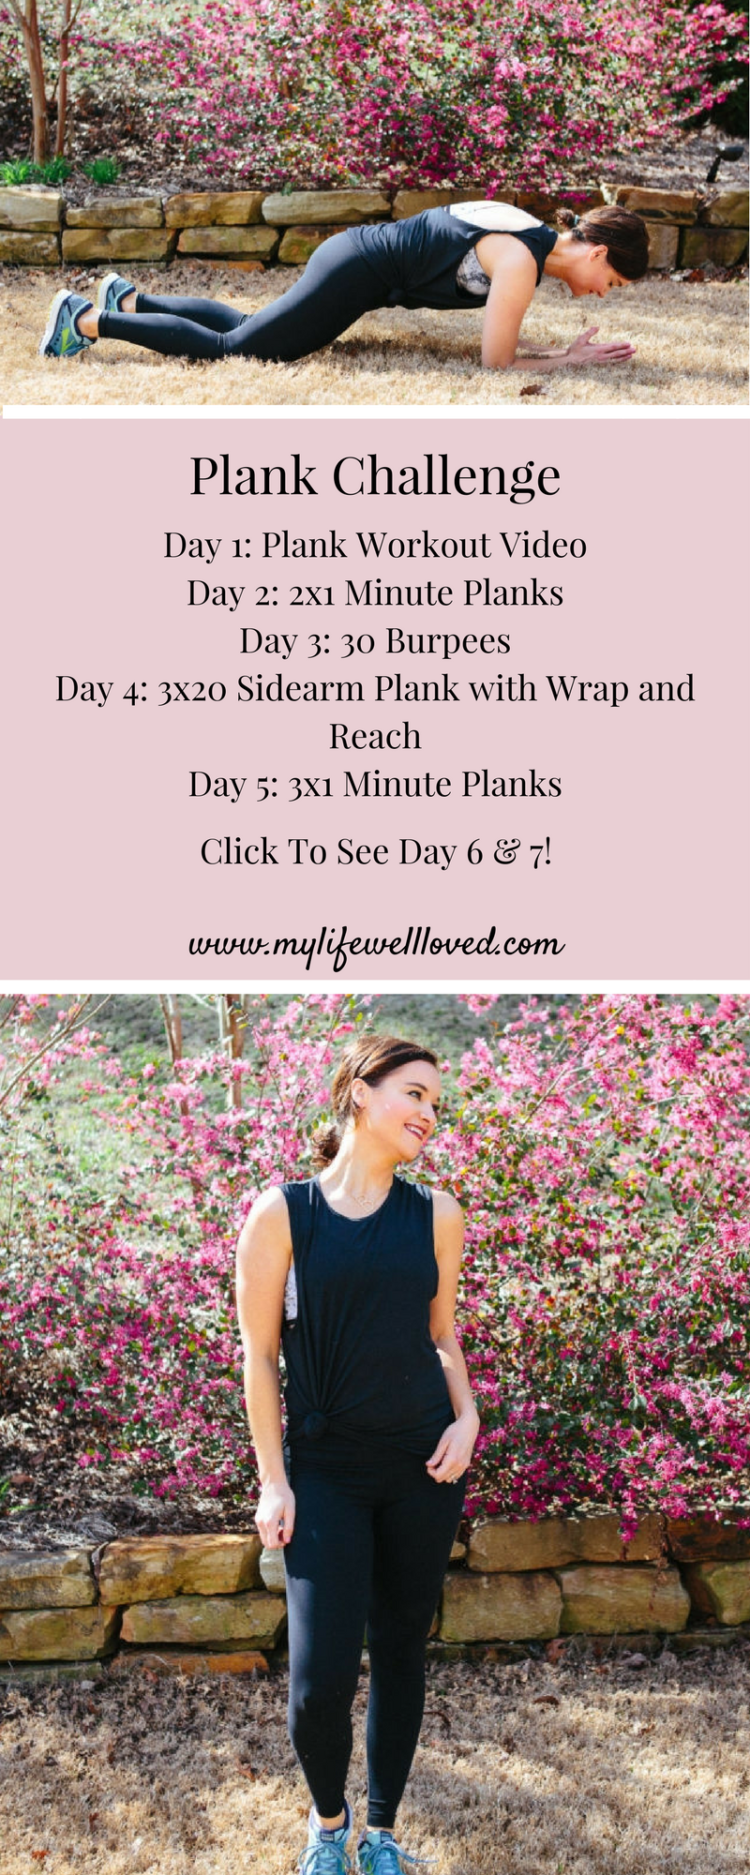 Plank Exercise Challenge workout video with Alabama blogger Heather of MyLifeWellLoved.com / #plankchallenge #workoutvideo Save this abs workout video for next time you want to get your plank challenge on!